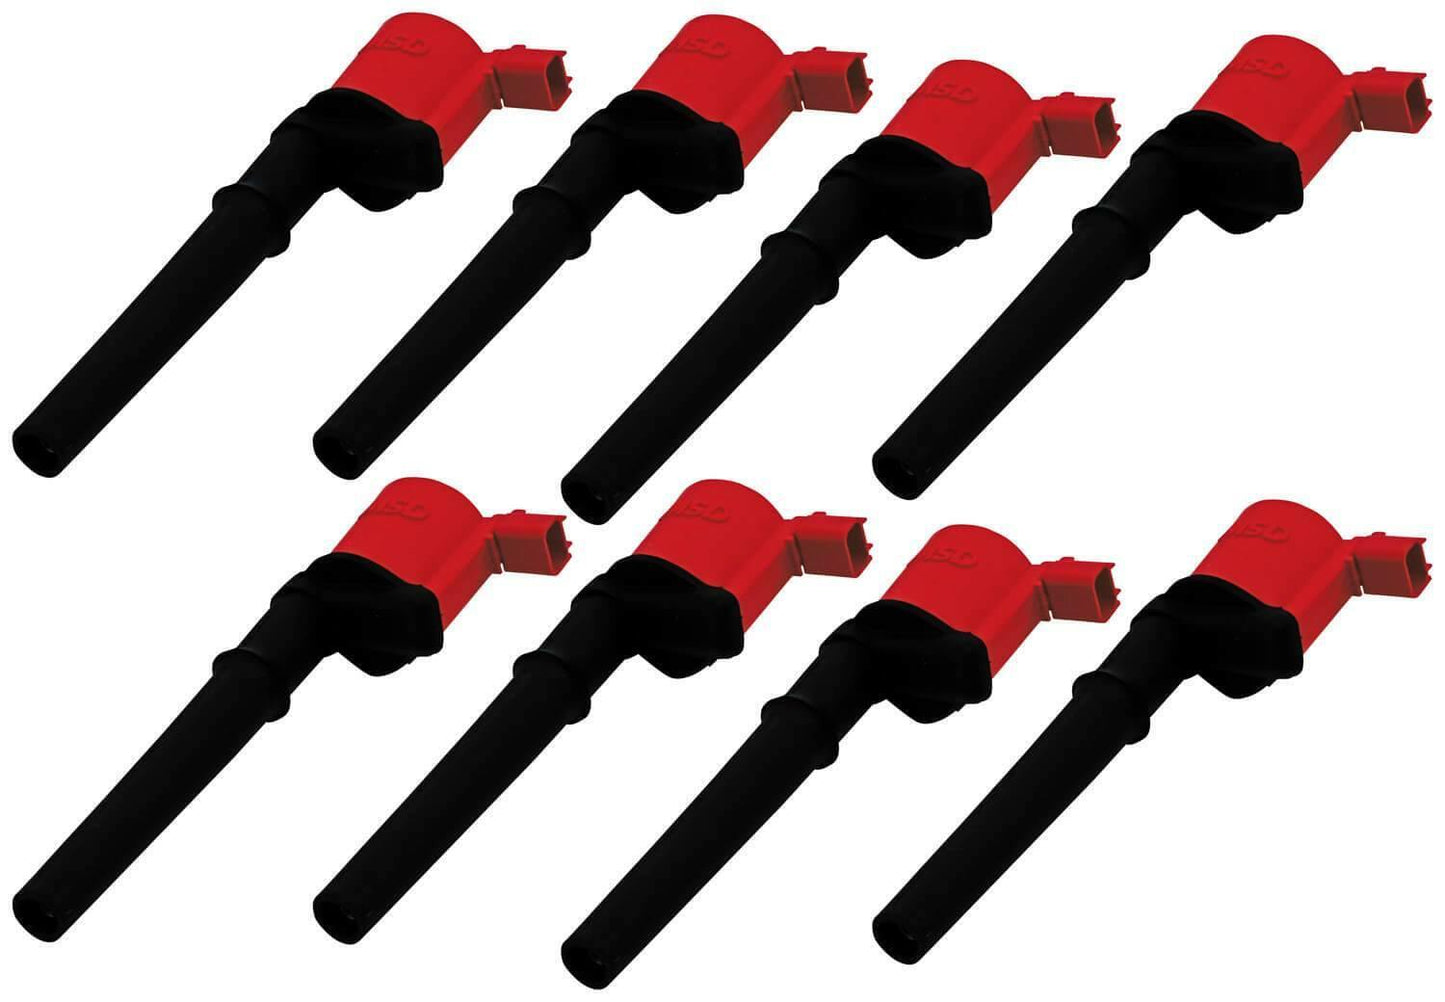 MSD Ignition Coils 1999-2014 Ford 4.6L/5.4L 4-valve engines, Red, 8-pack - 82448